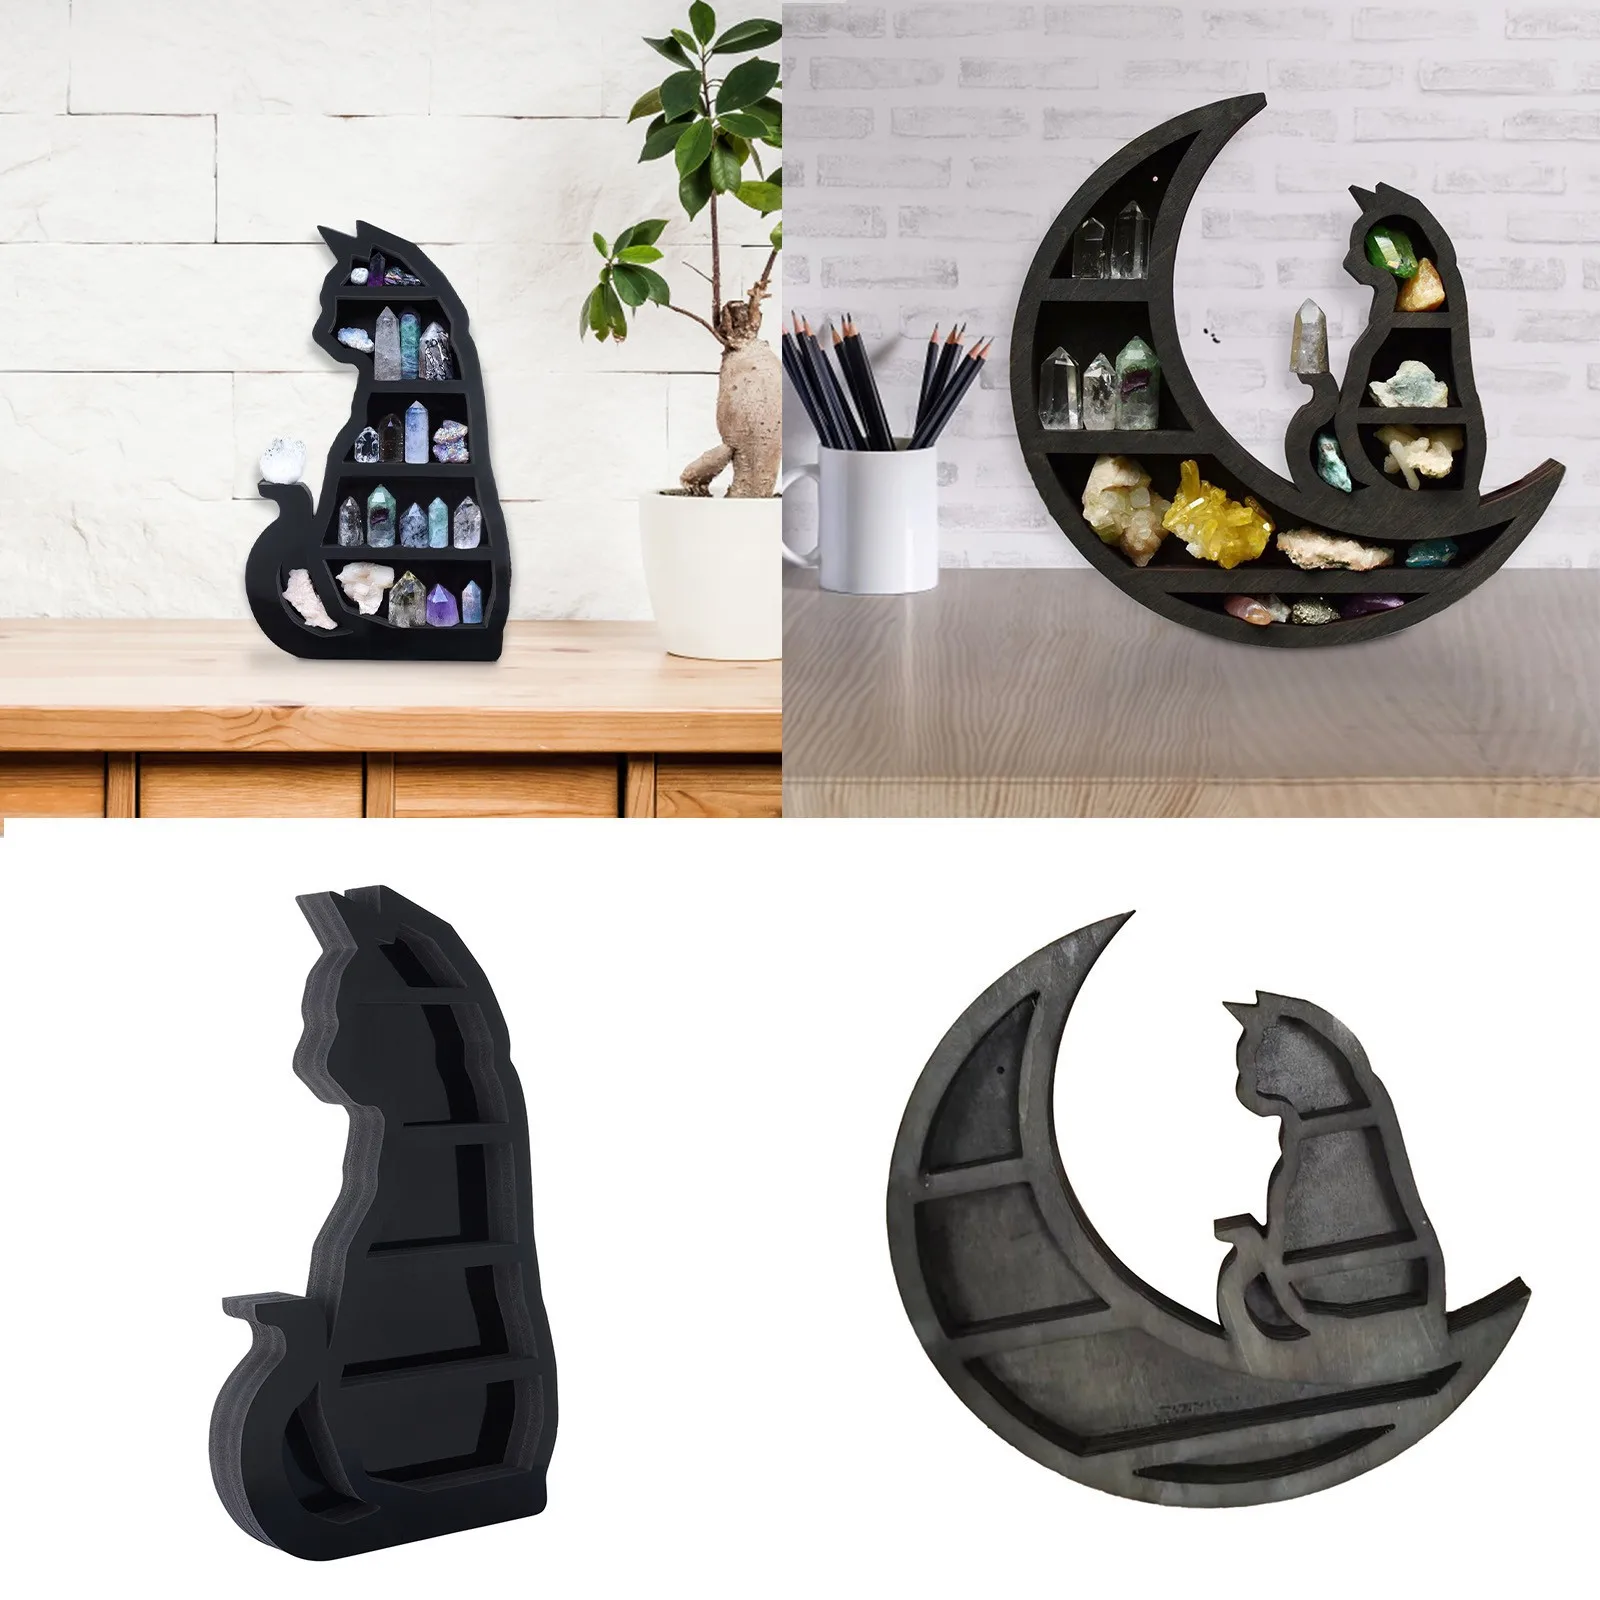 Cat and Moon Wooden Shelf for home decor3